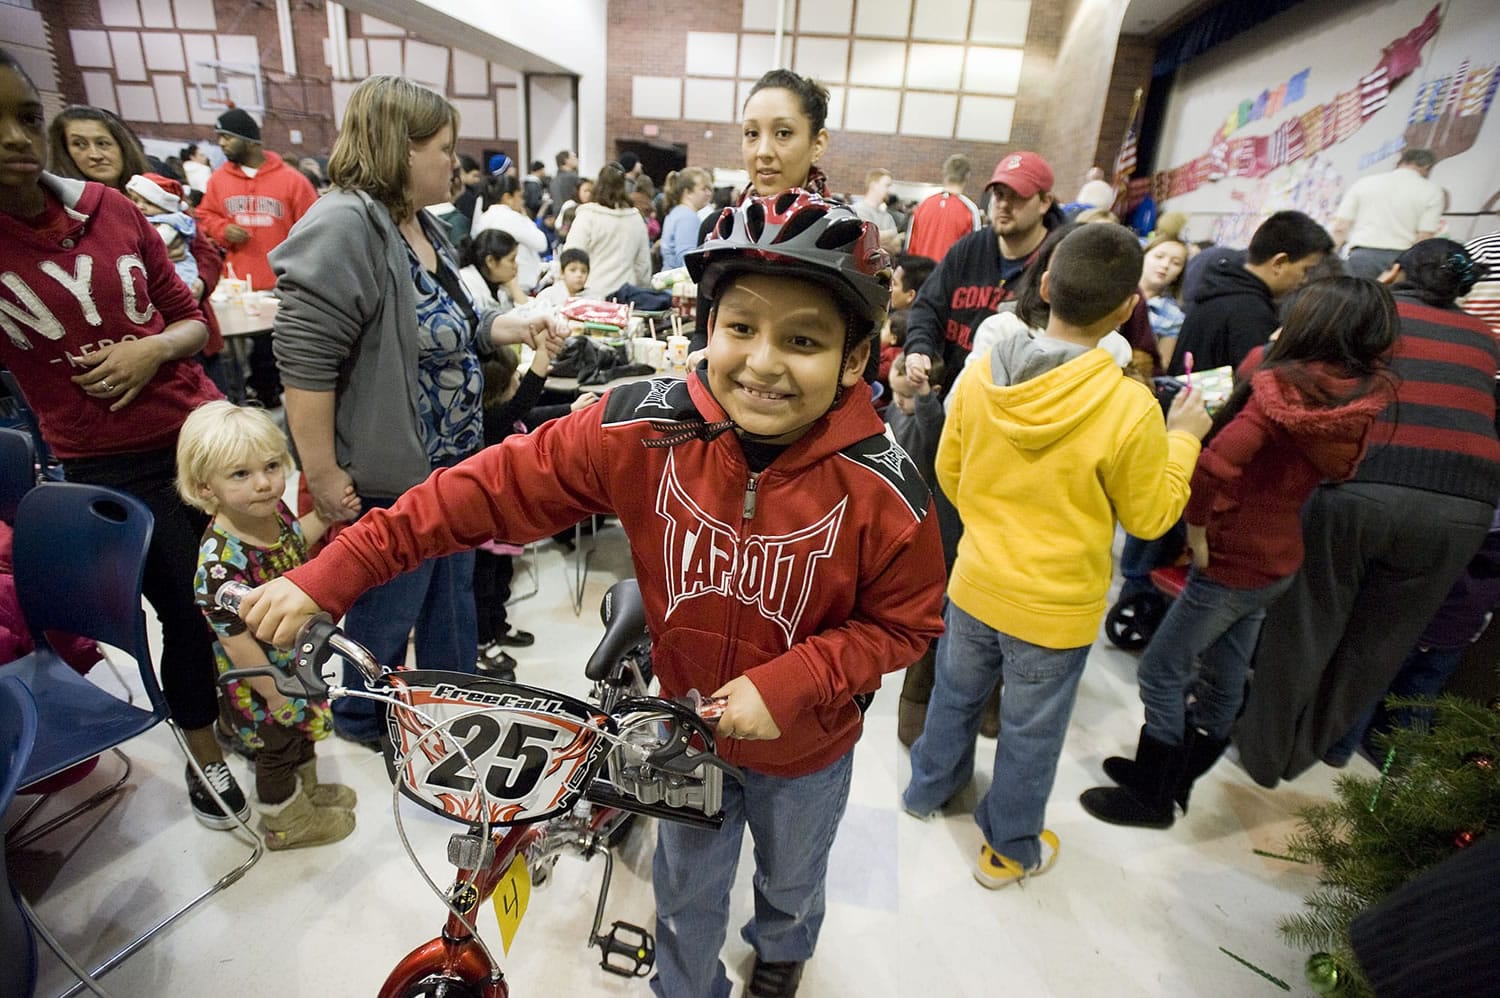 Jose Castaneda scored a new bike at the 2010 holiday party hosted by the Northeast Hazel Dell Neighborhood Association. Last year 800 children attended the community Christmas party. Not only does the party provide gifts for children, but it supplies food boxes for the needy, too.